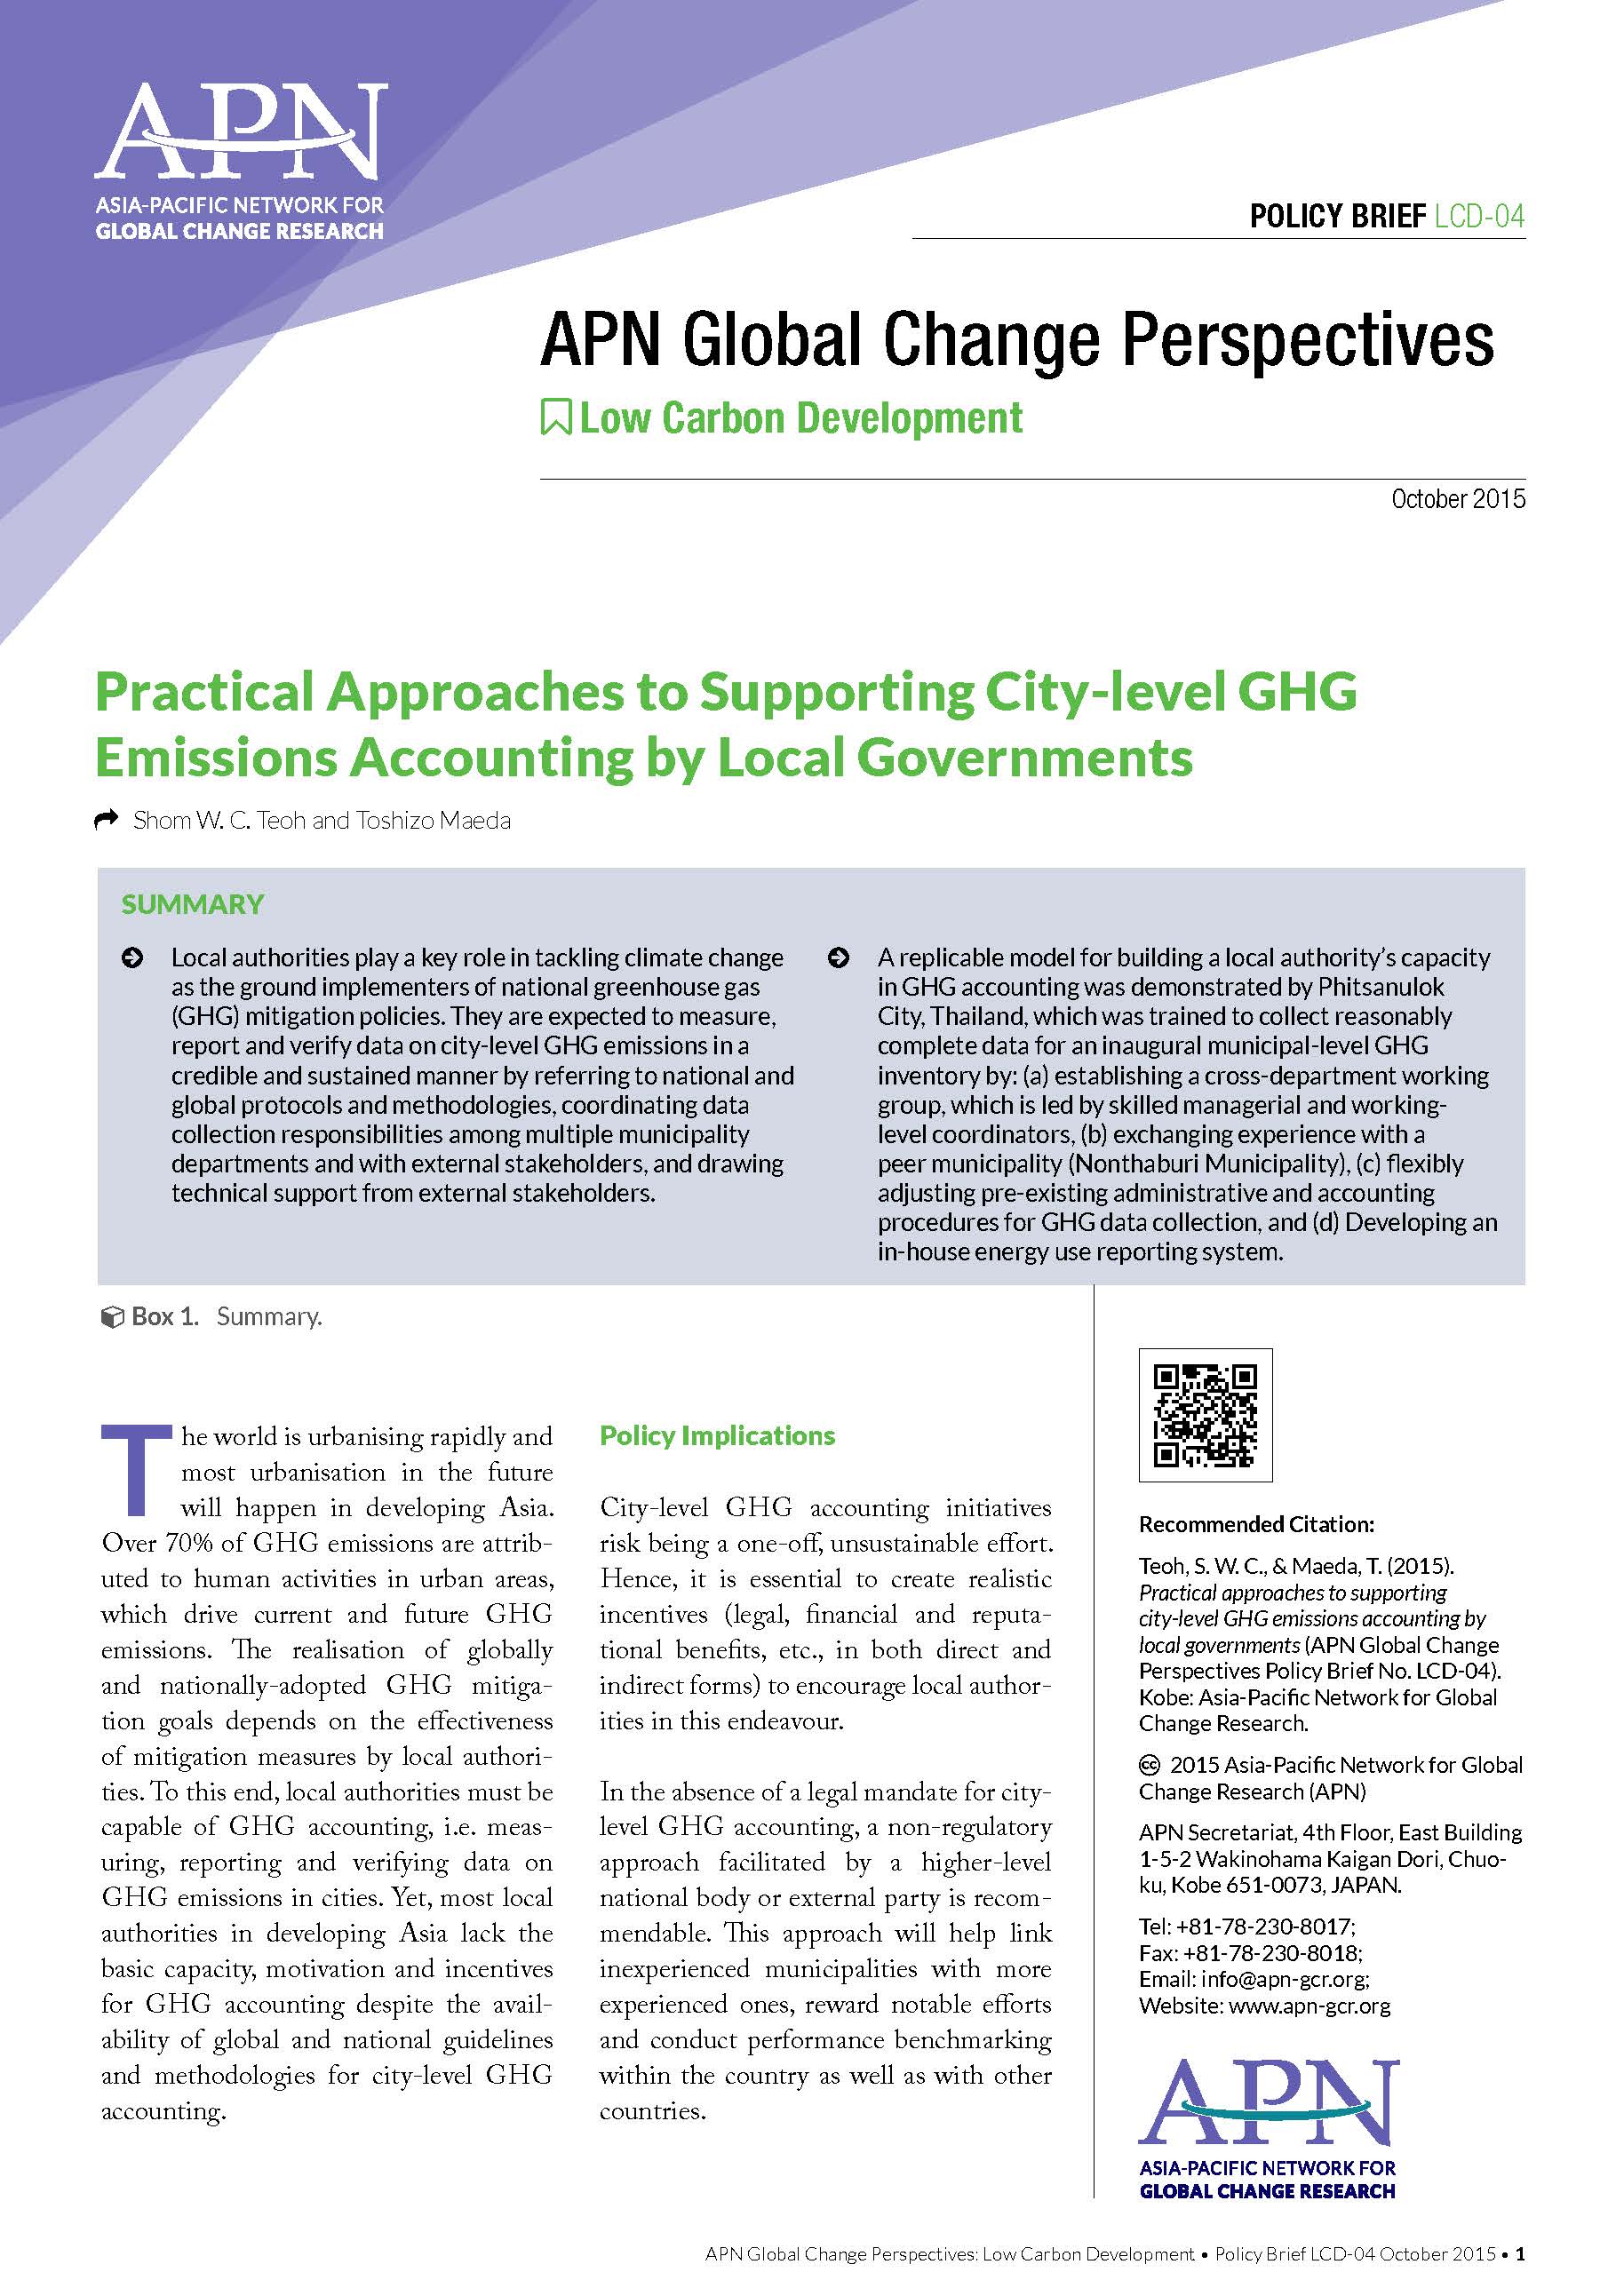 Practical Approaches to Supporting City-level GHG Emissions Accounting by Local Governments